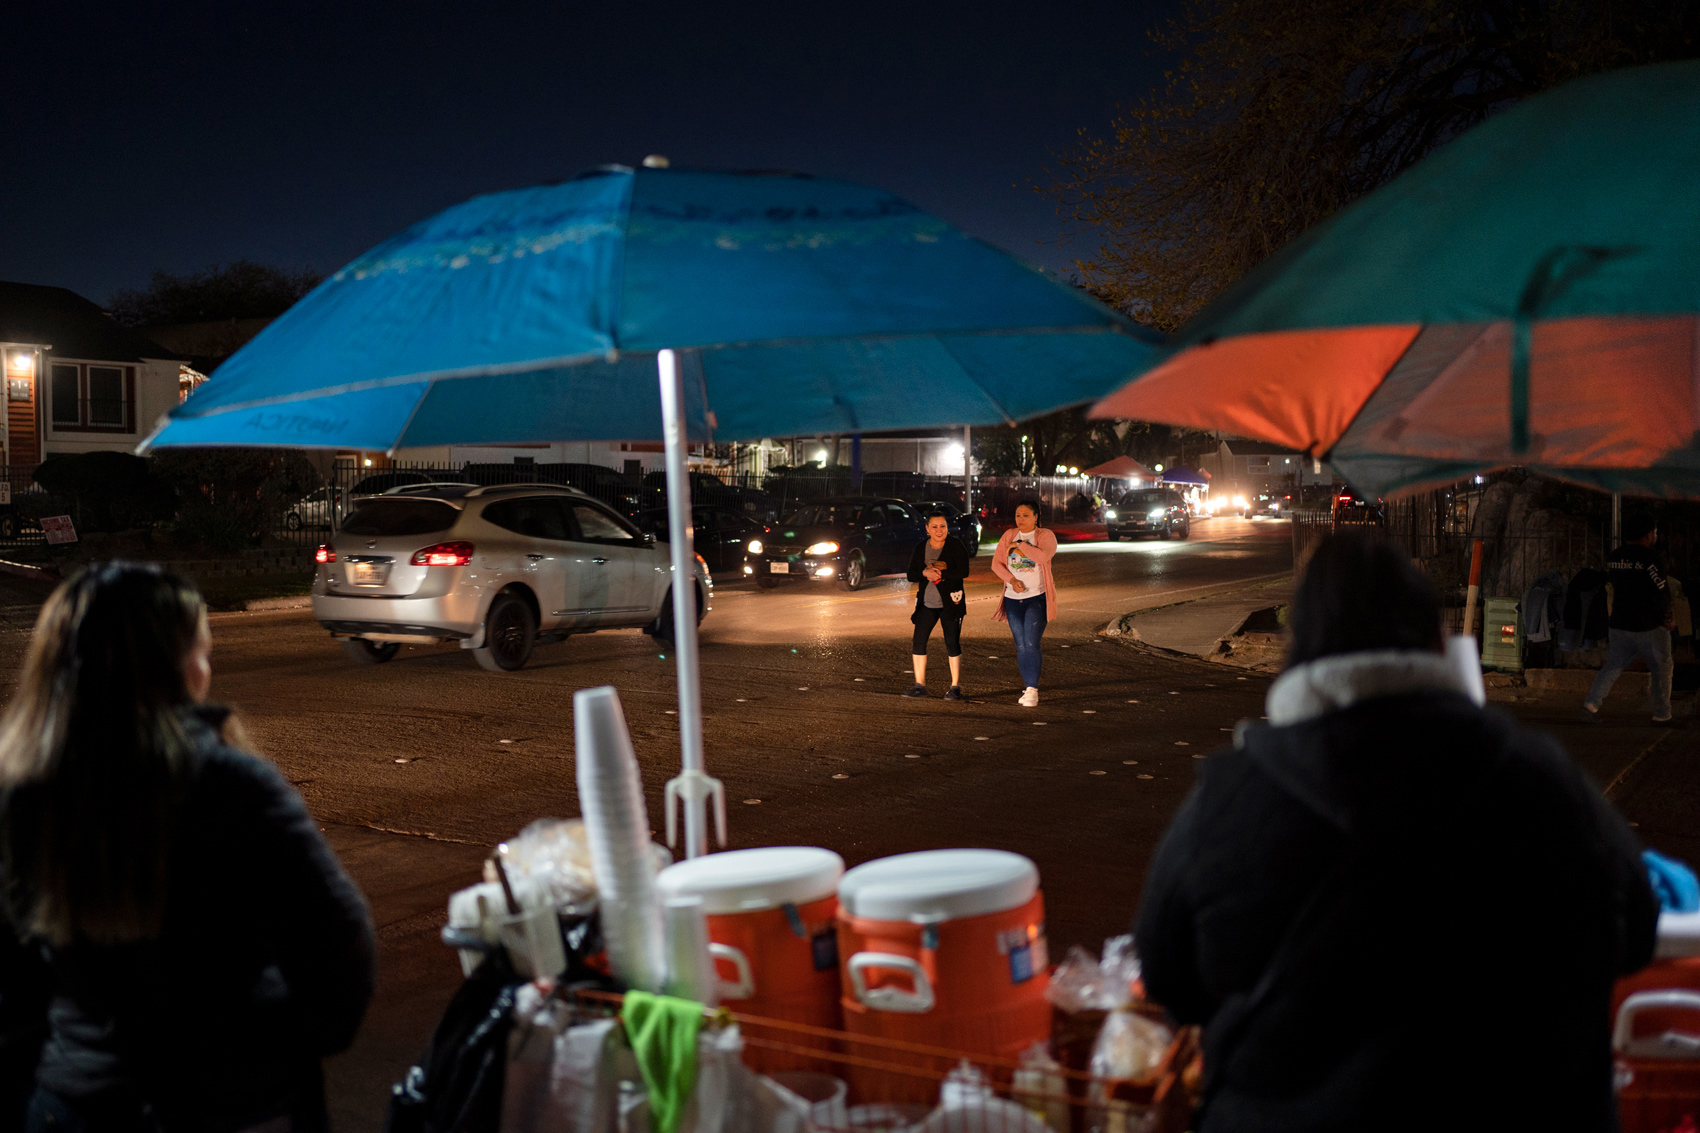 People walk through an area of Sharpstown colloquially known as "Little Guatemala” on Friday, Feb. 23 in Houston. Vendors selling everything from food, clothing, and hardware have set up shop.